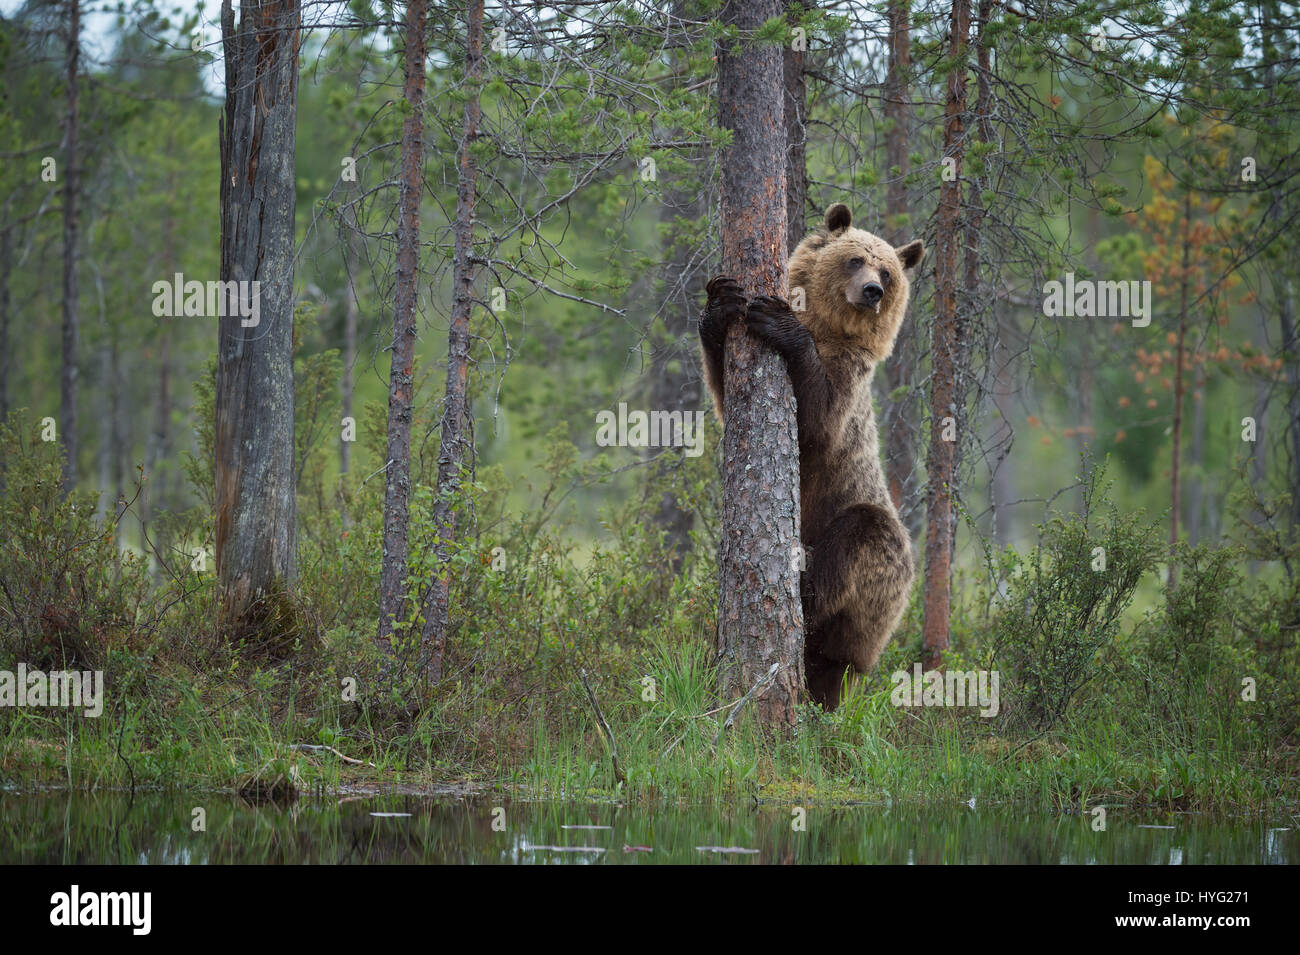 KAINUU, FINLAND: THE CUTEST little bear family have been snapped enjoying a day in the woods by a British photographer. Pictures show mummy bear watching over her two little curious cubs have a go at climbing trees.  Mummy bear can even be seen joining in and showing the babies how it’s done. Other pictures show the cuddly cuties play fighting, having a sibling embrace and just chilling out, taking a break from activities.  Photographer Janette Hill from Llanigon, Herefordshire travelled to the heart of the Taiga Forest in Finland to catch a glimpse of these wild brown bears in their natural h Stock Photo